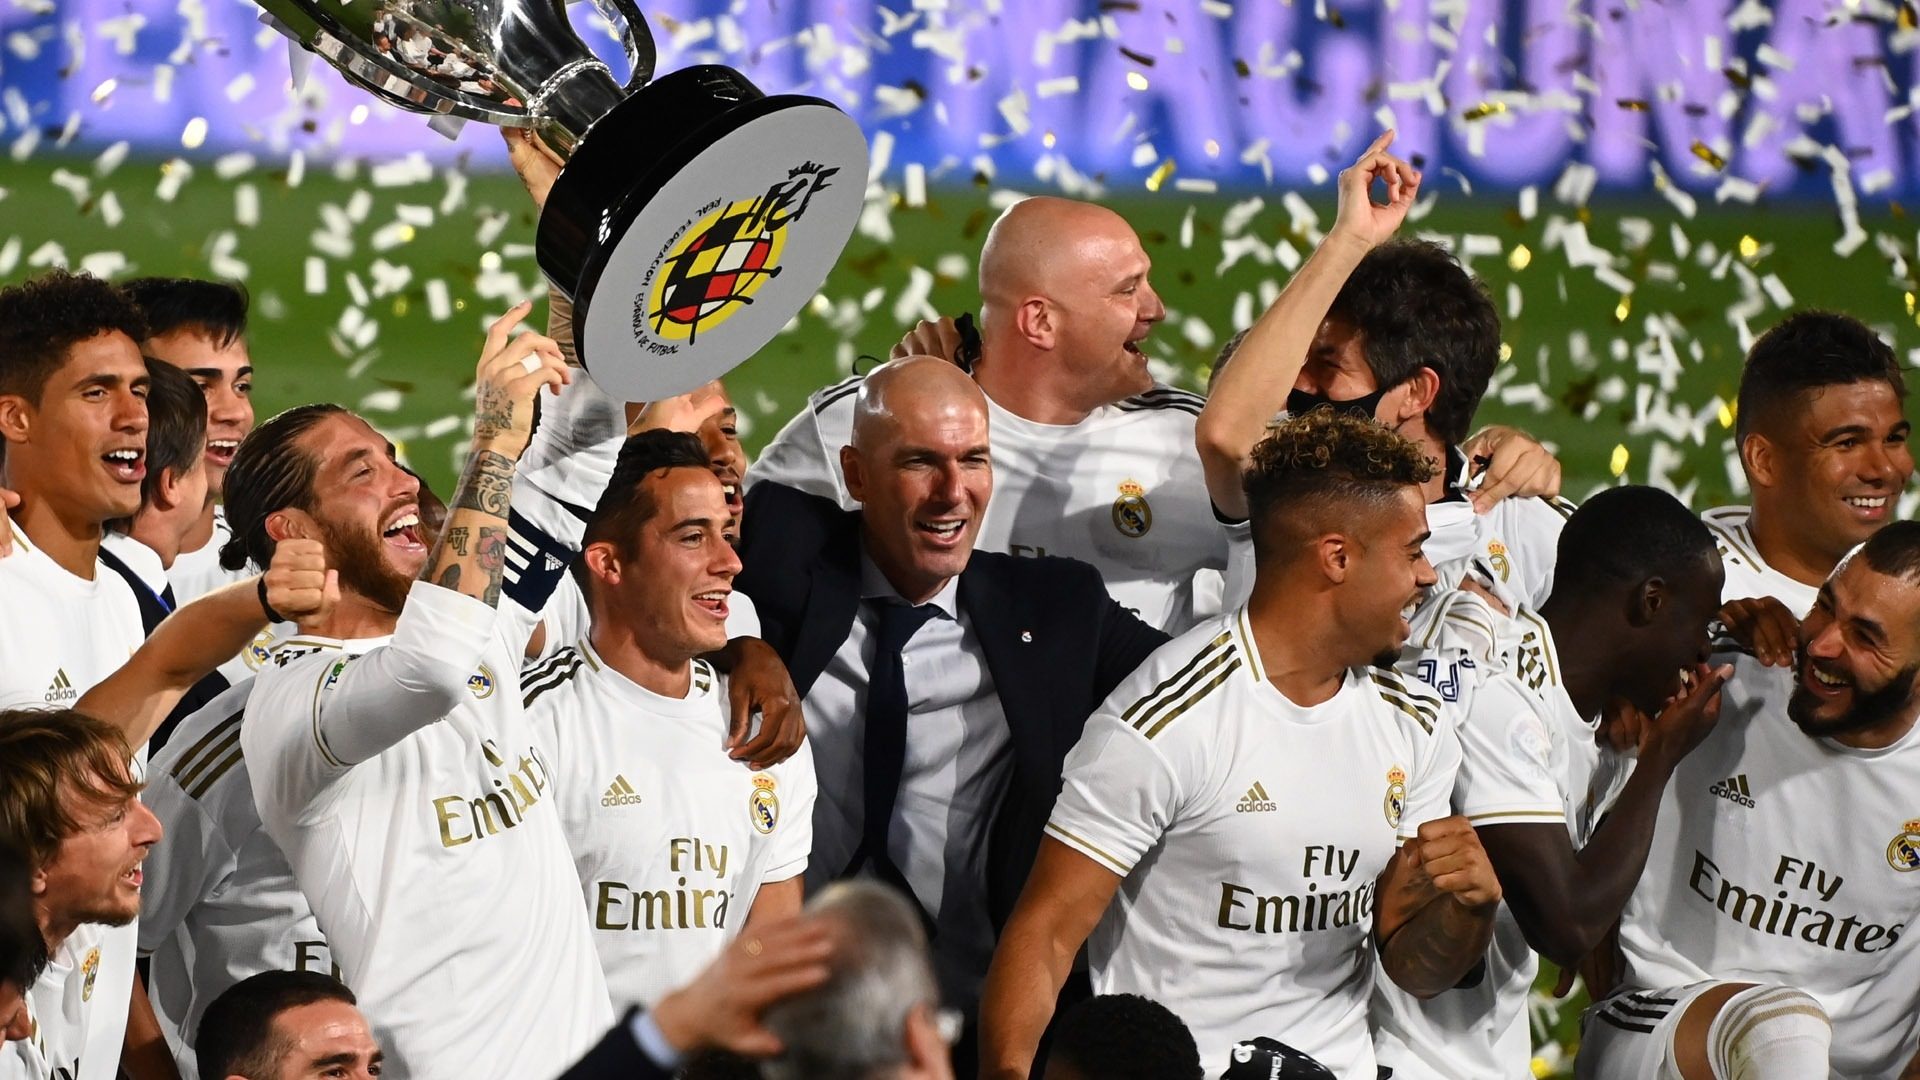 Zidane's second league title as Madrid manager will silence critics